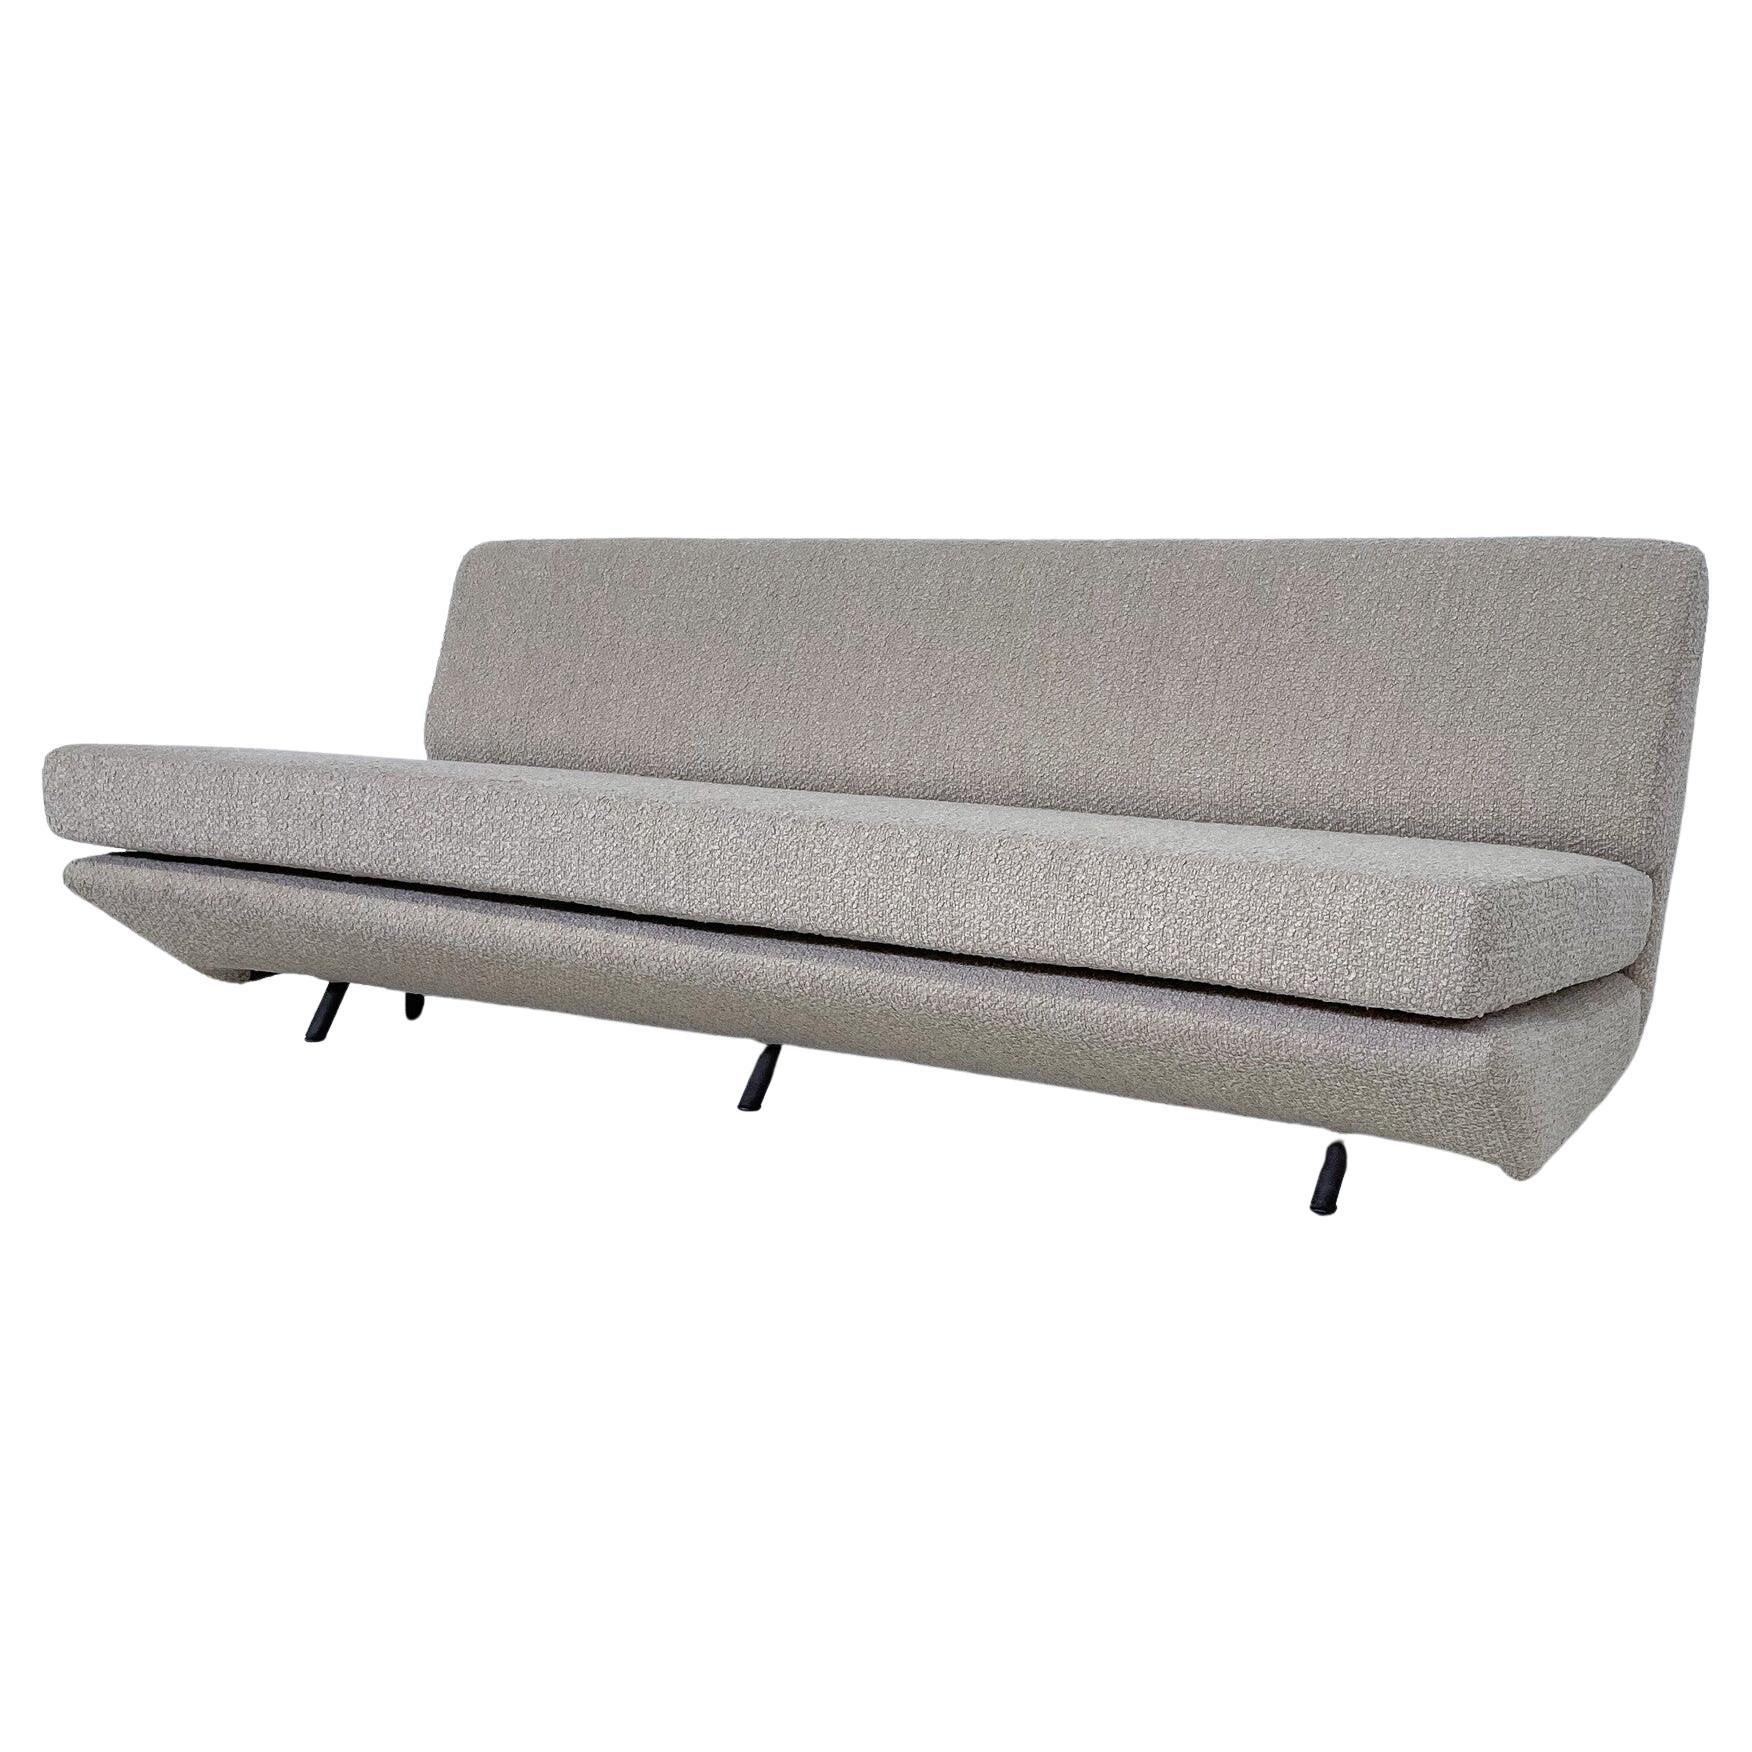 Mid-Century Modern Sofa by Marco Zanuso, Italy, 1950s, New Beige Upholstery For Sale